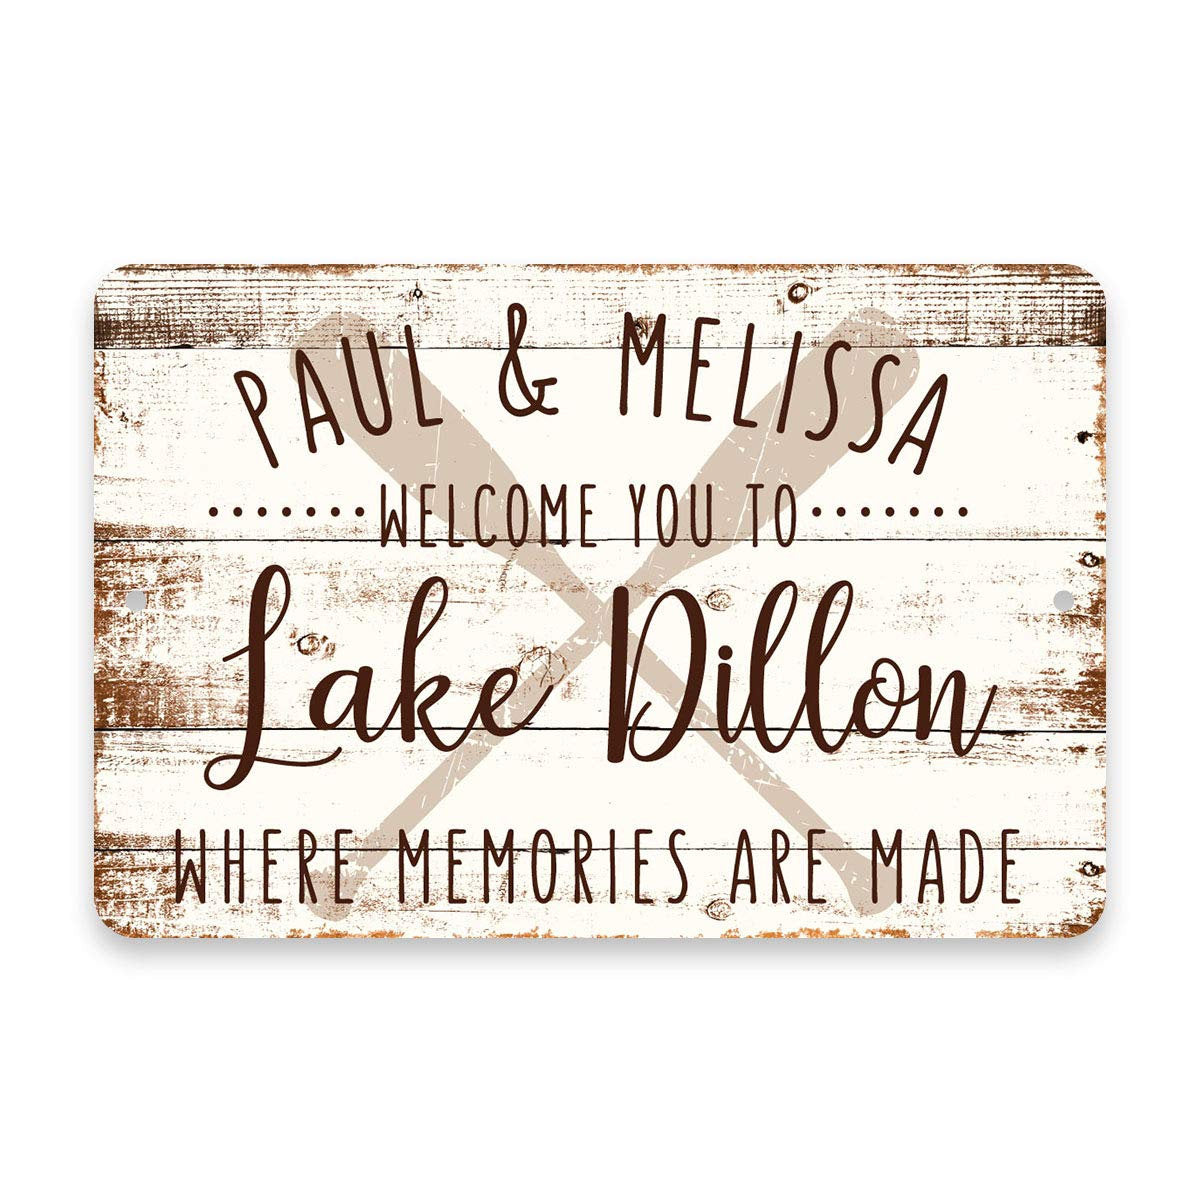 Personalized Welcome to Lake Dillon Where Memories are Made Sign - 8 X 12 Metal Sign with Wood Look